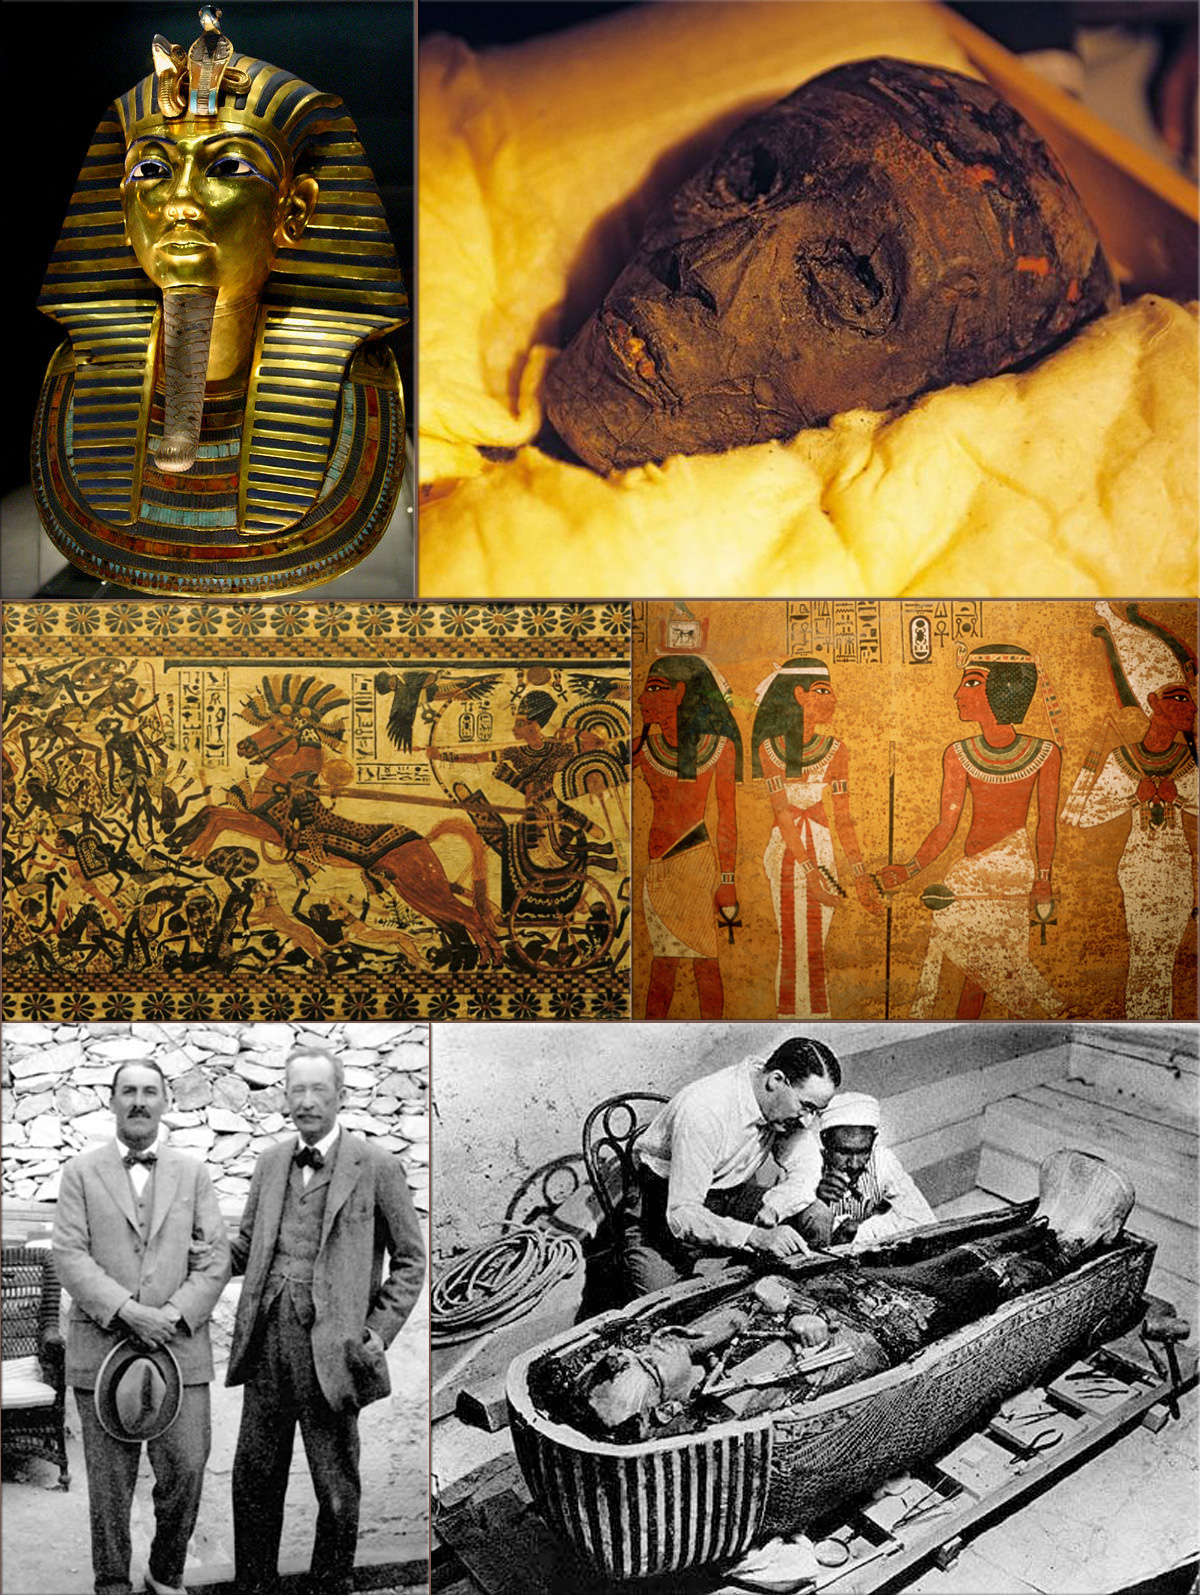 Howard Carter and Lord Carnarvon become the first people to enter the tomb of Pharaoh Tutankhamun in over 3000 years